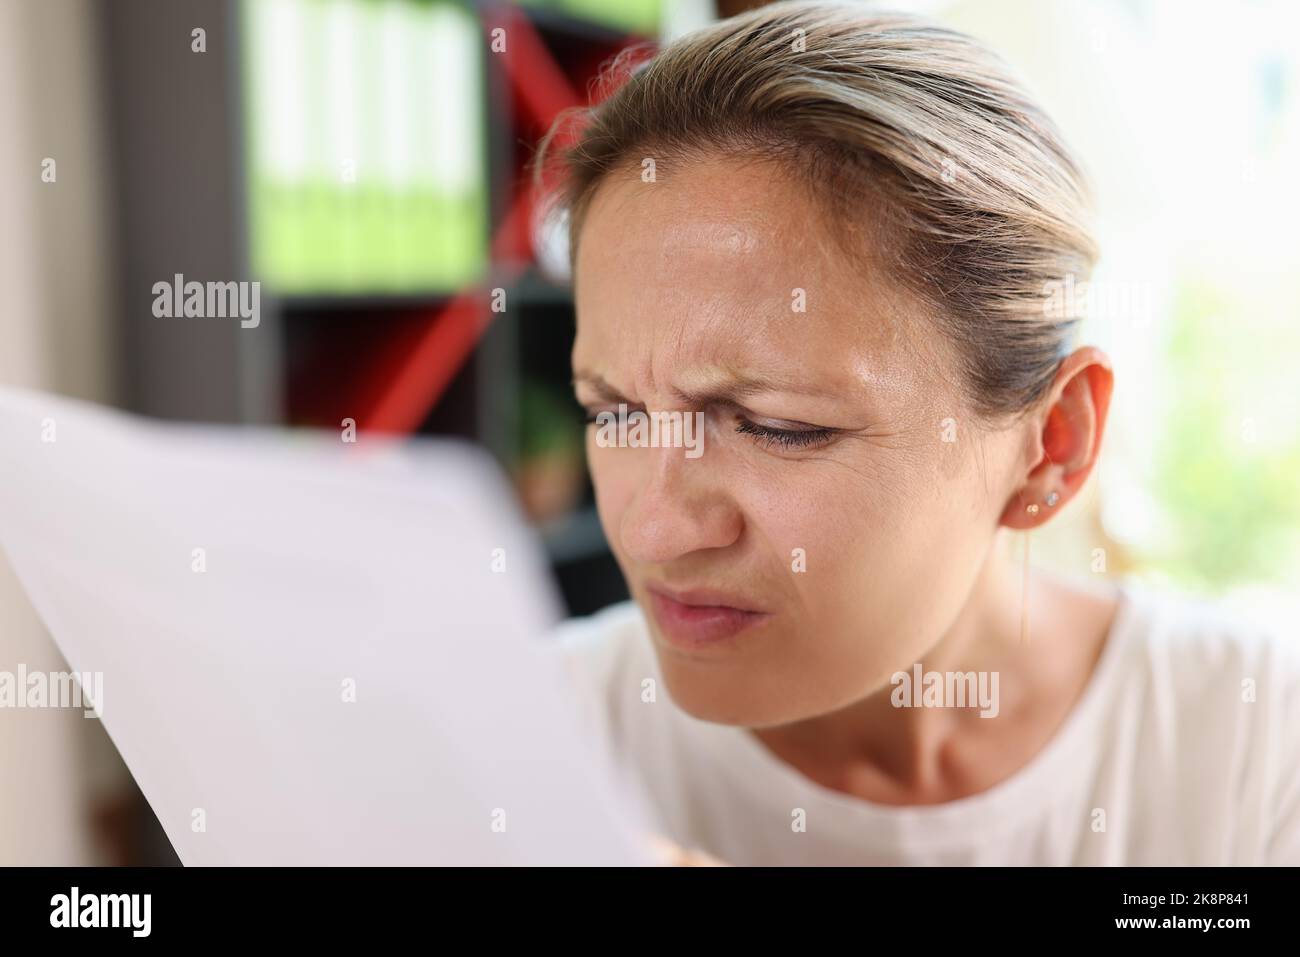 Focused woman trying read papers, squinting to see more clearly Stock Photo